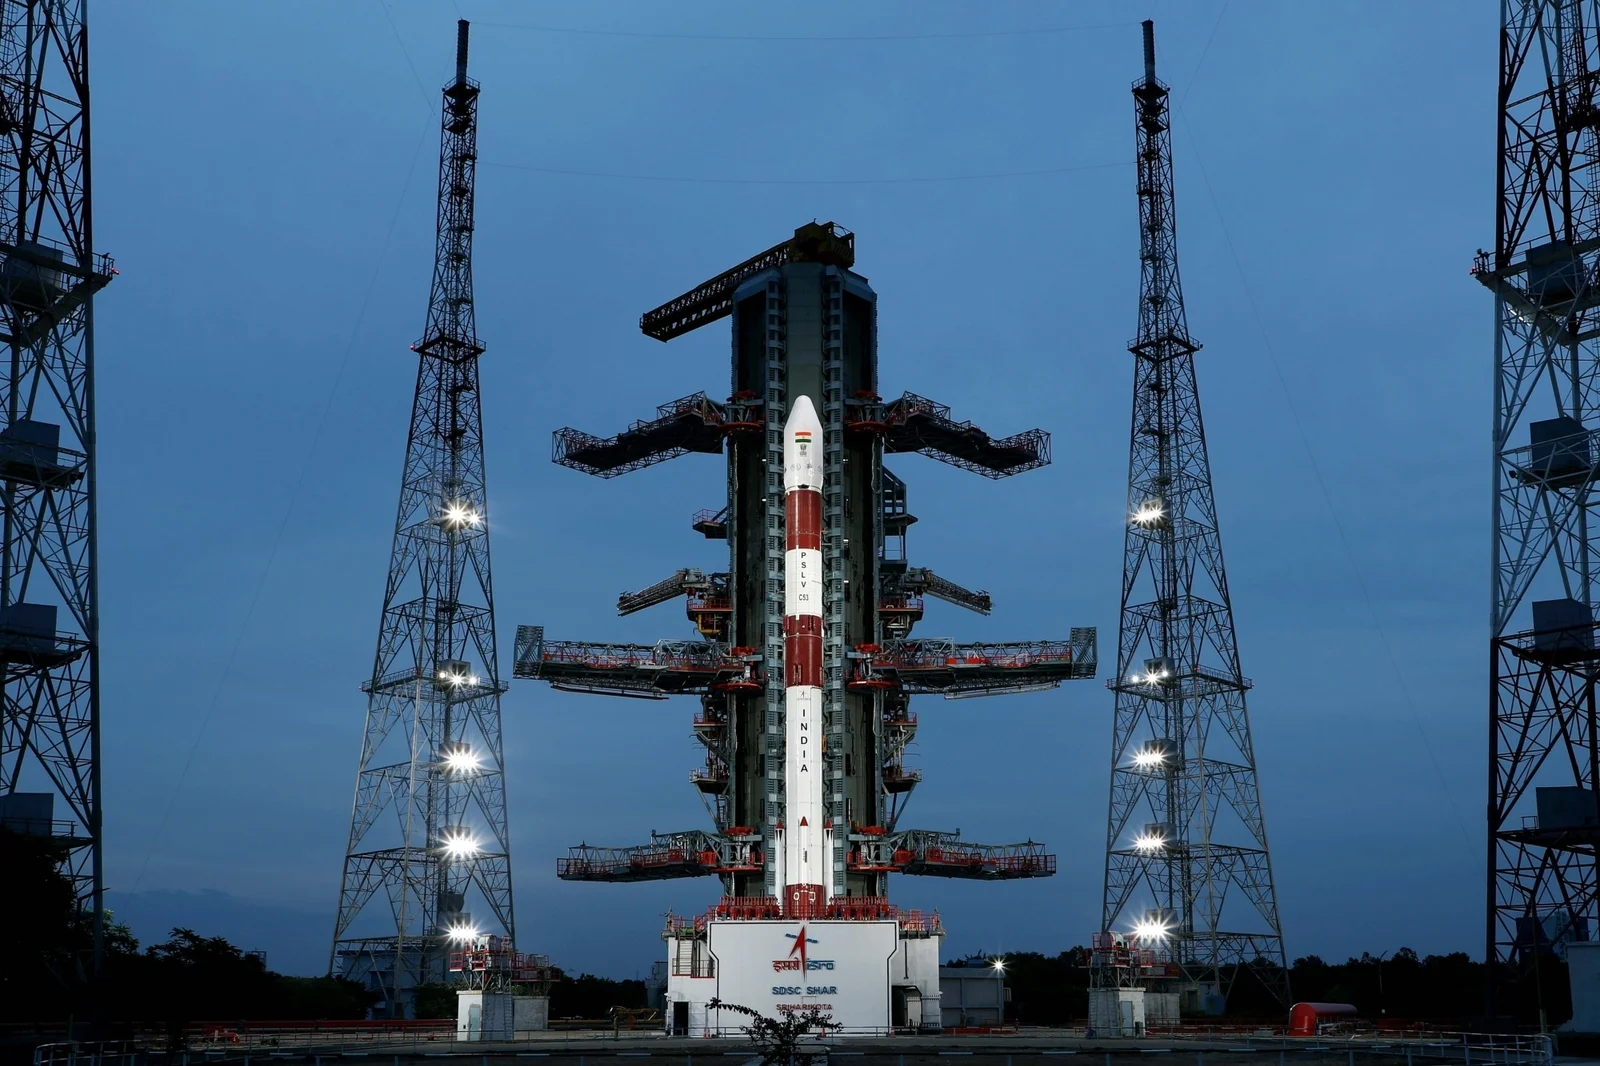 Chennai Startup Launches Rocket in Historic Moment for Indian Space Industry (Backed by ISRO)